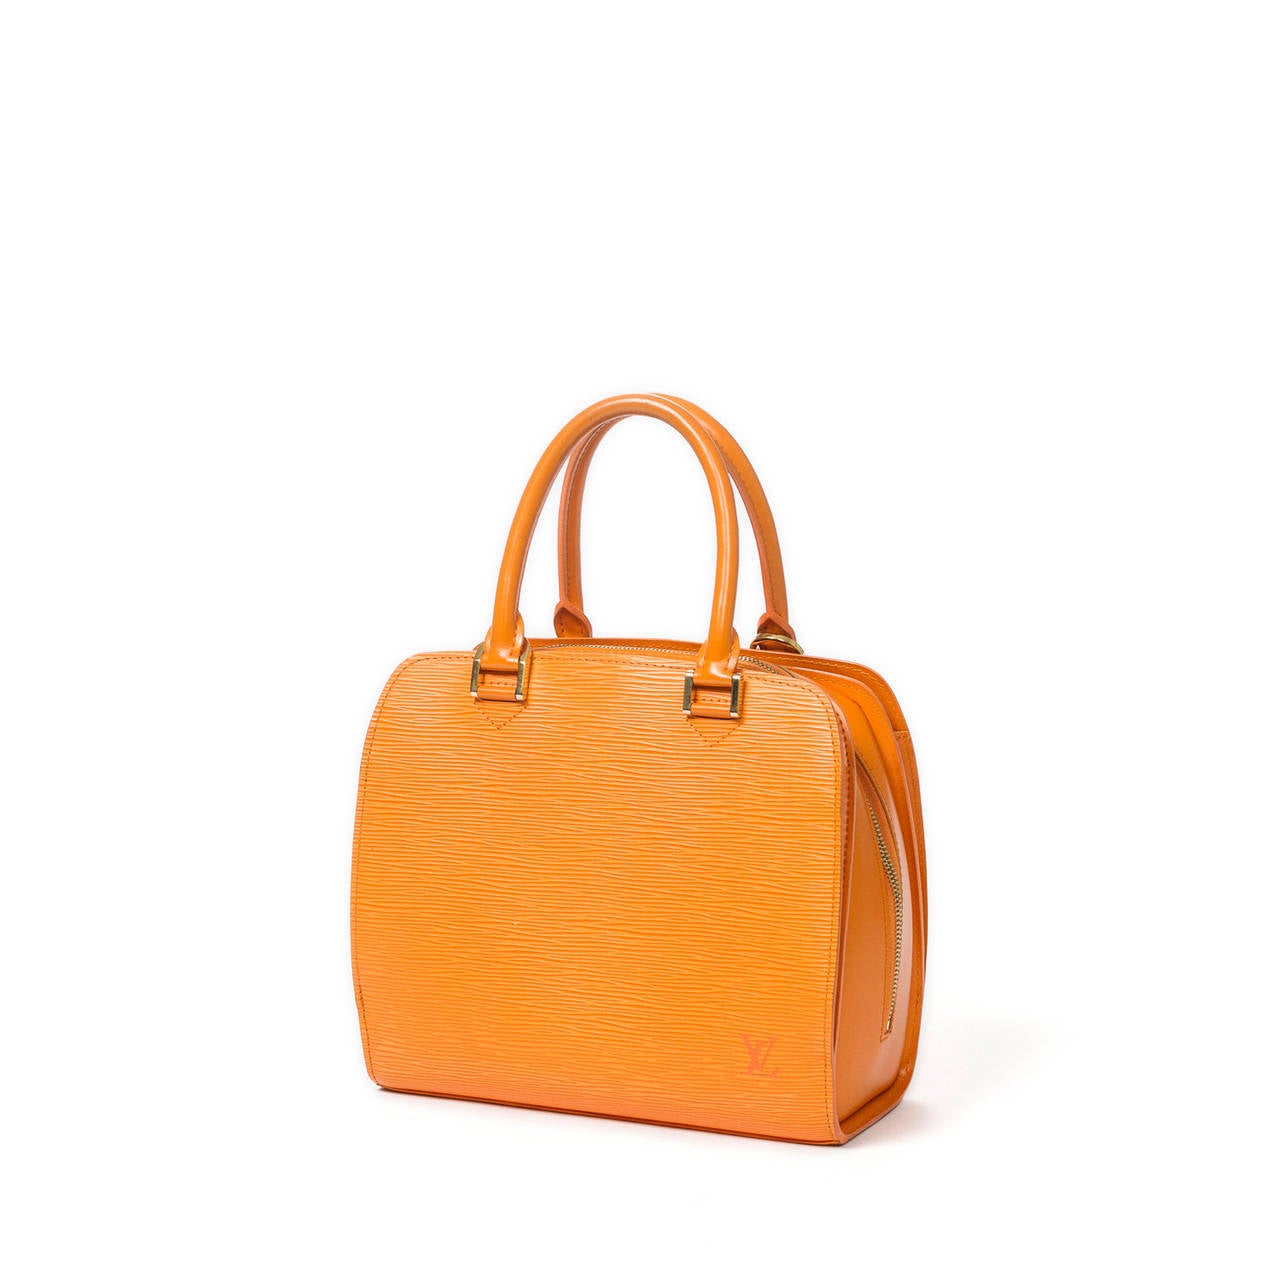 Pont-Neuf in mandarine epi leather with 2 exterior slip pockets, golden brass hardware. Mandarine alcantara lined interior with one slip and one zip pocket. Model of 2004 (Code : MI0054). Dustbag included. Scuffs on the leather, especially at the